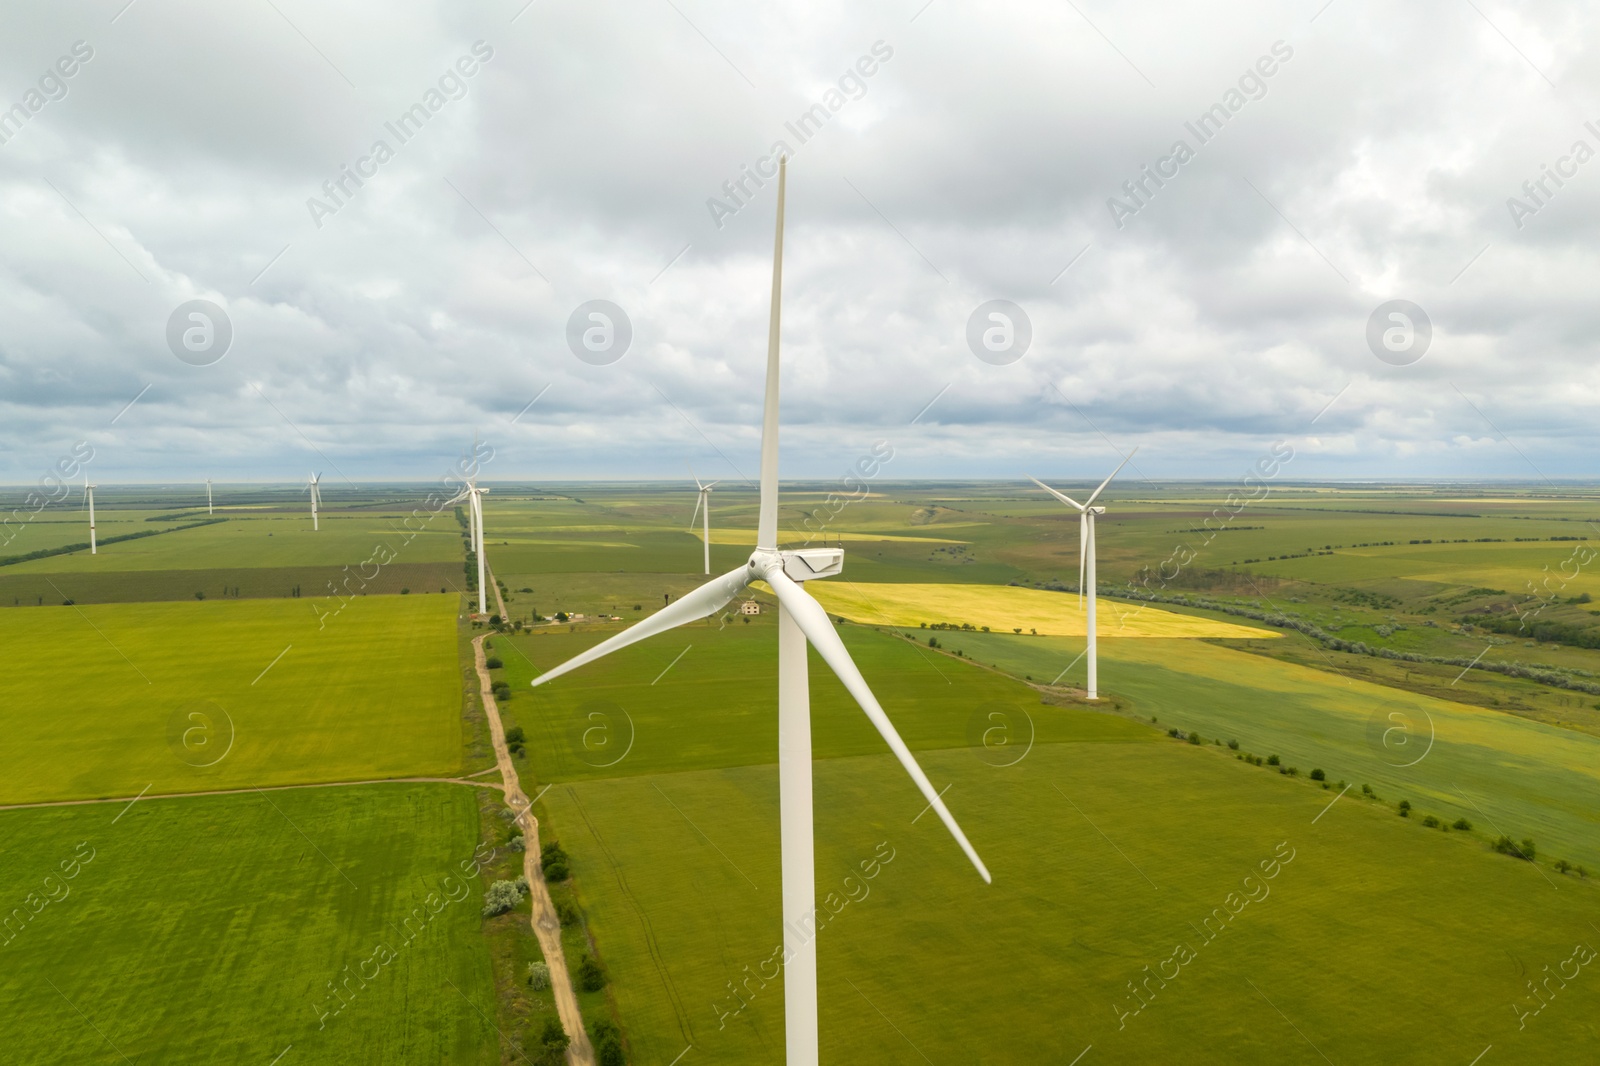 Image of Aerial view of wind turbines in field on cloudy day